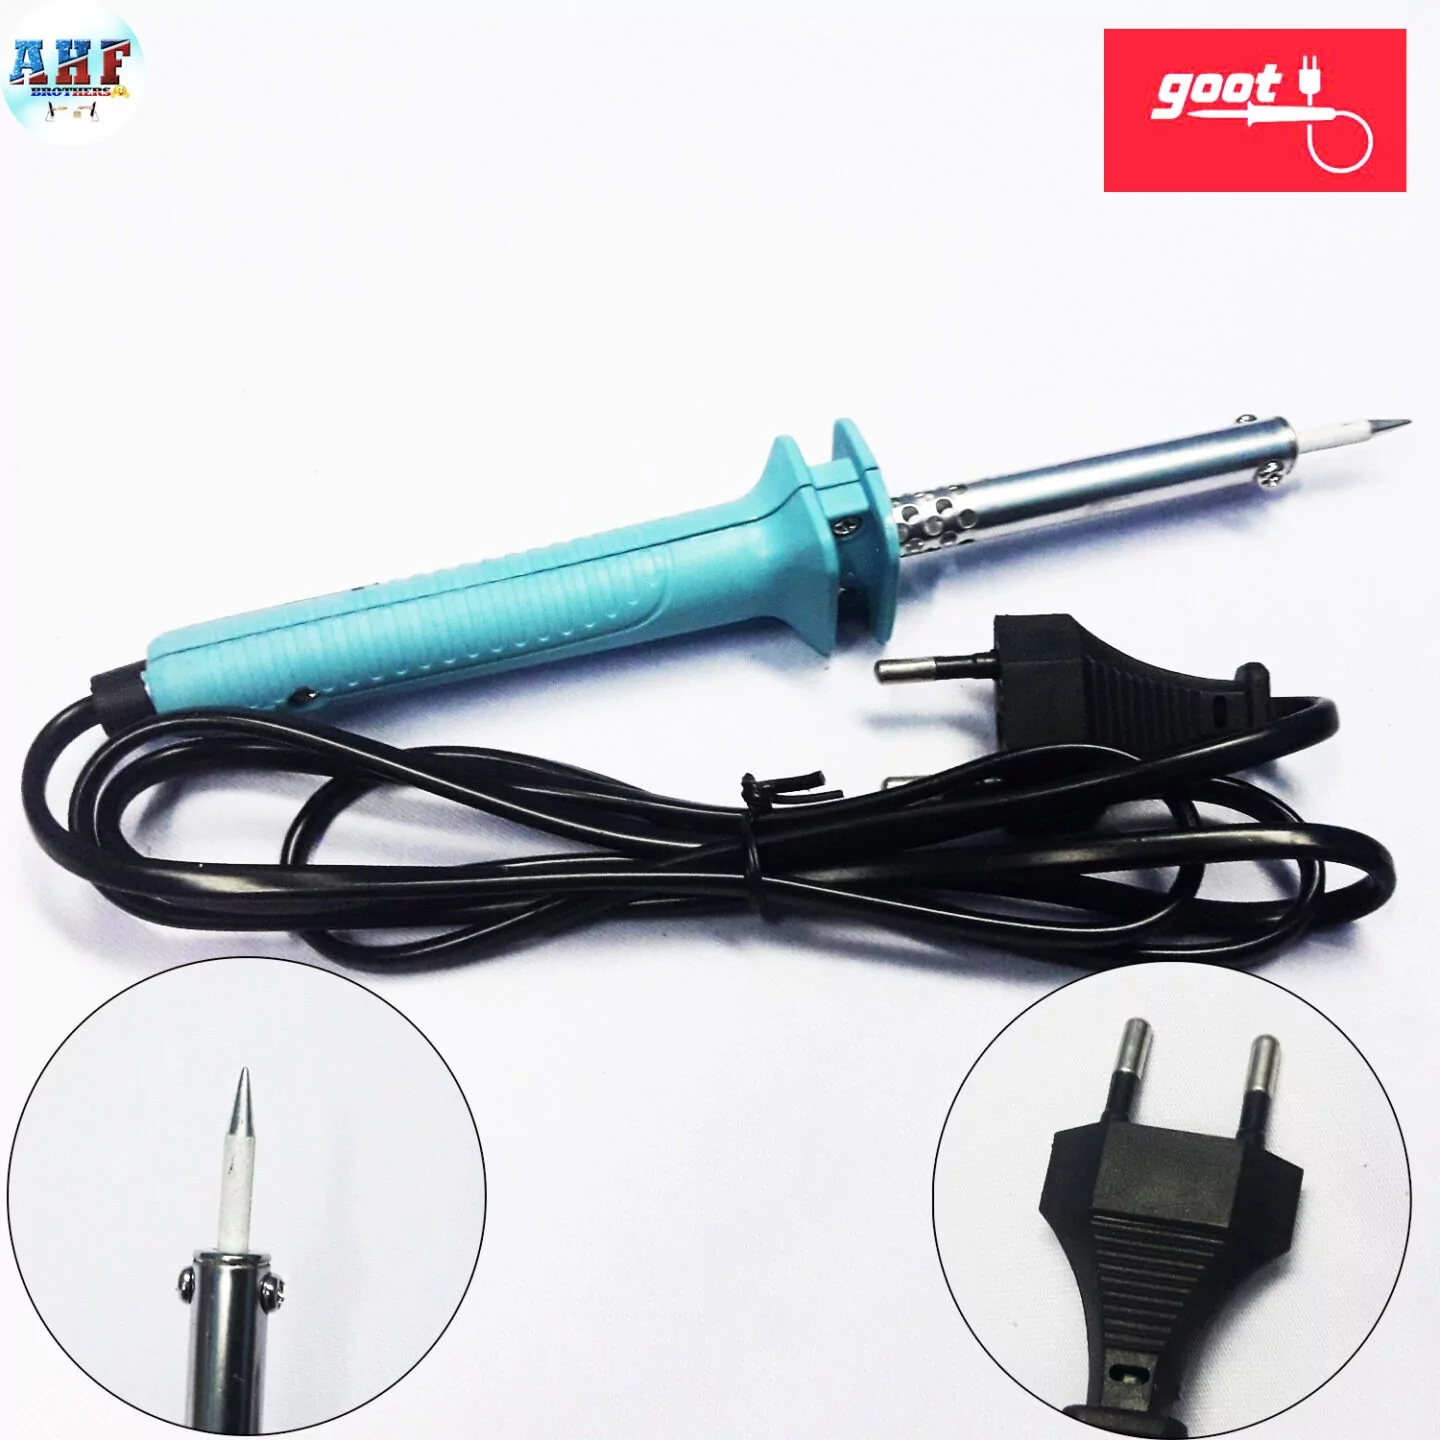 60W Soldering Iron Electric Bouth: Buy 60W Electric bouth Best Price in Sri Lanka | ido.lk